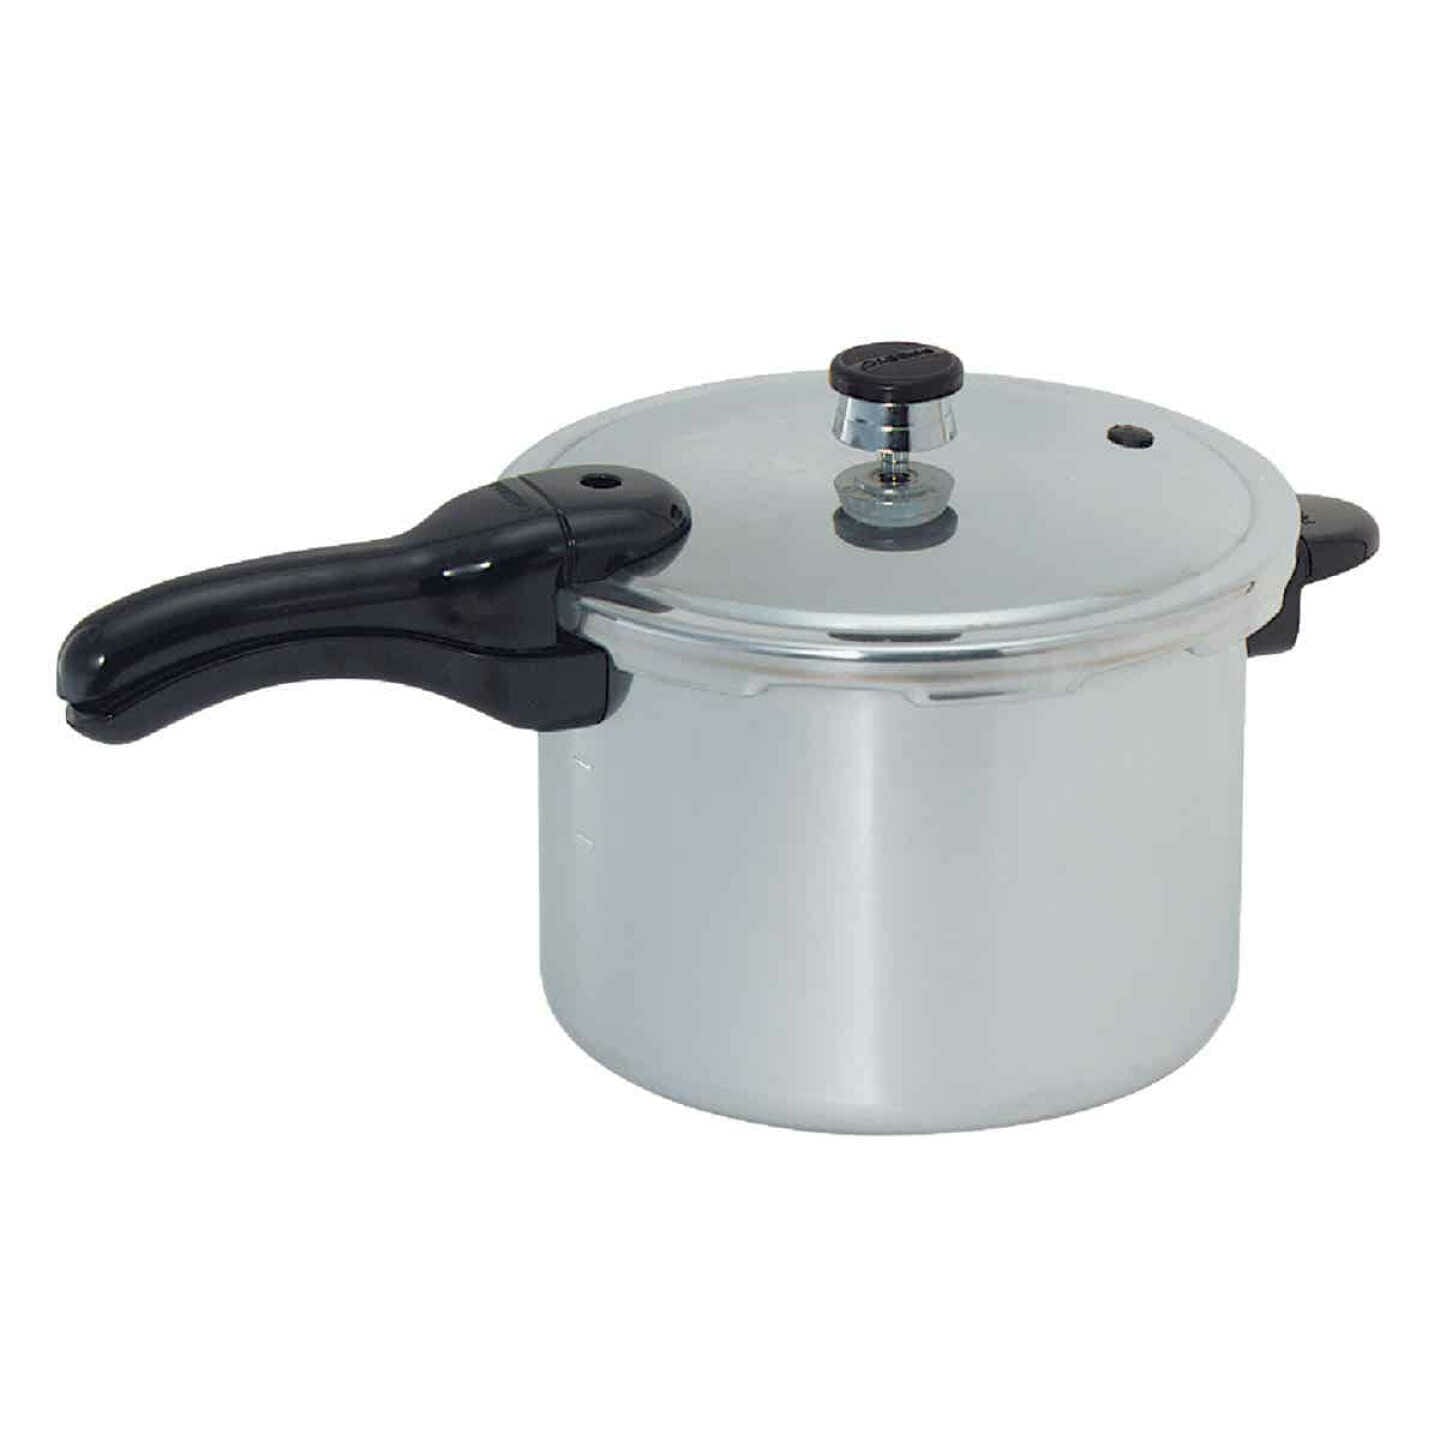 Top 9 Best Smallest Pressure Cookers, Testing By Experts 1